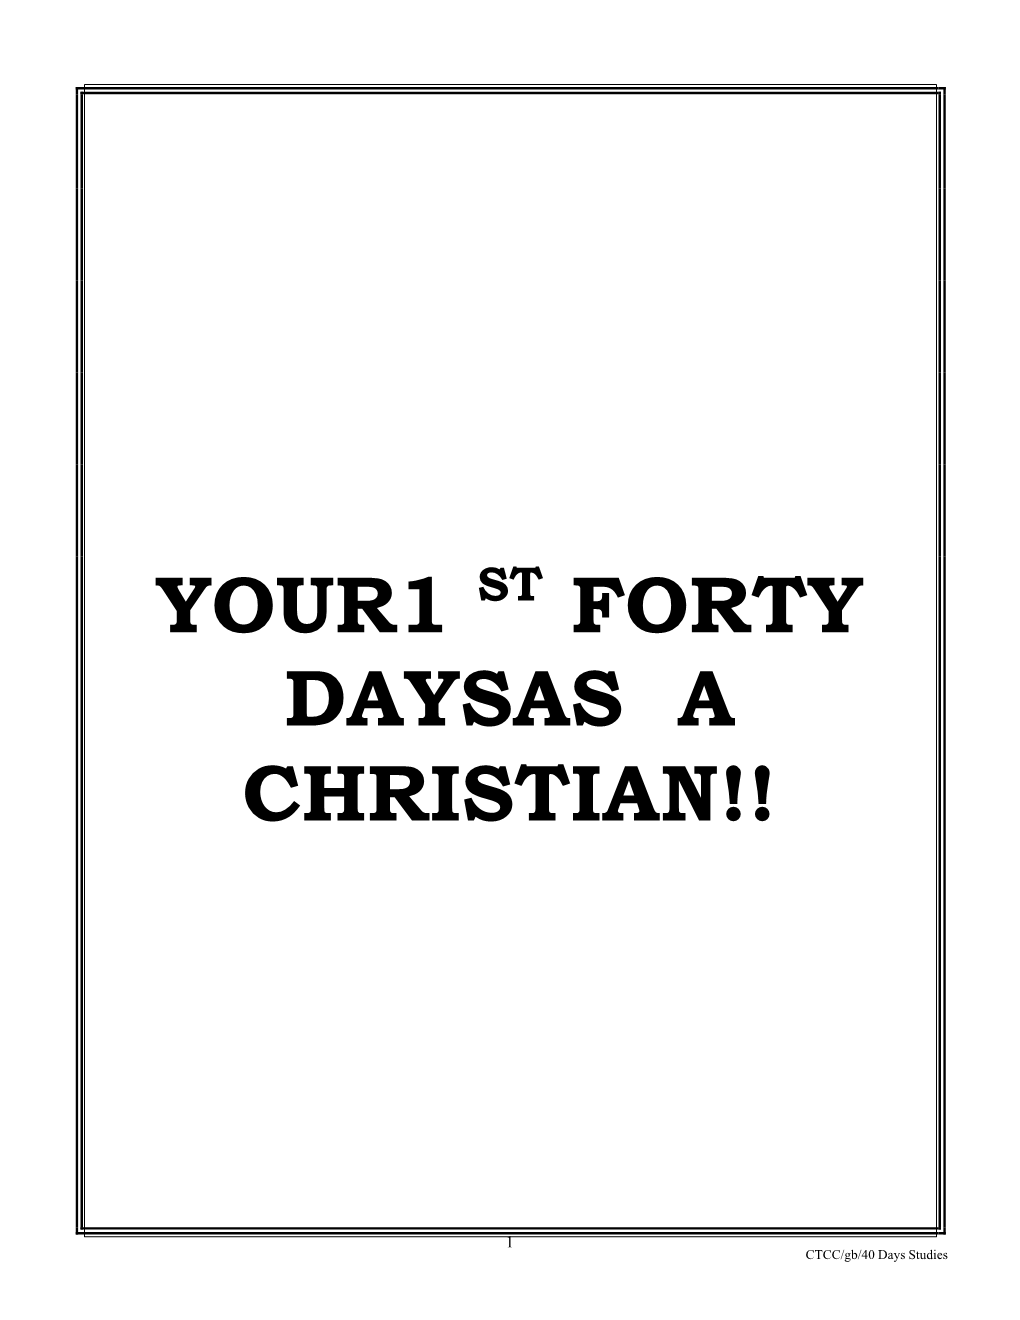 Your1 St Forty Daysas a Christian!!